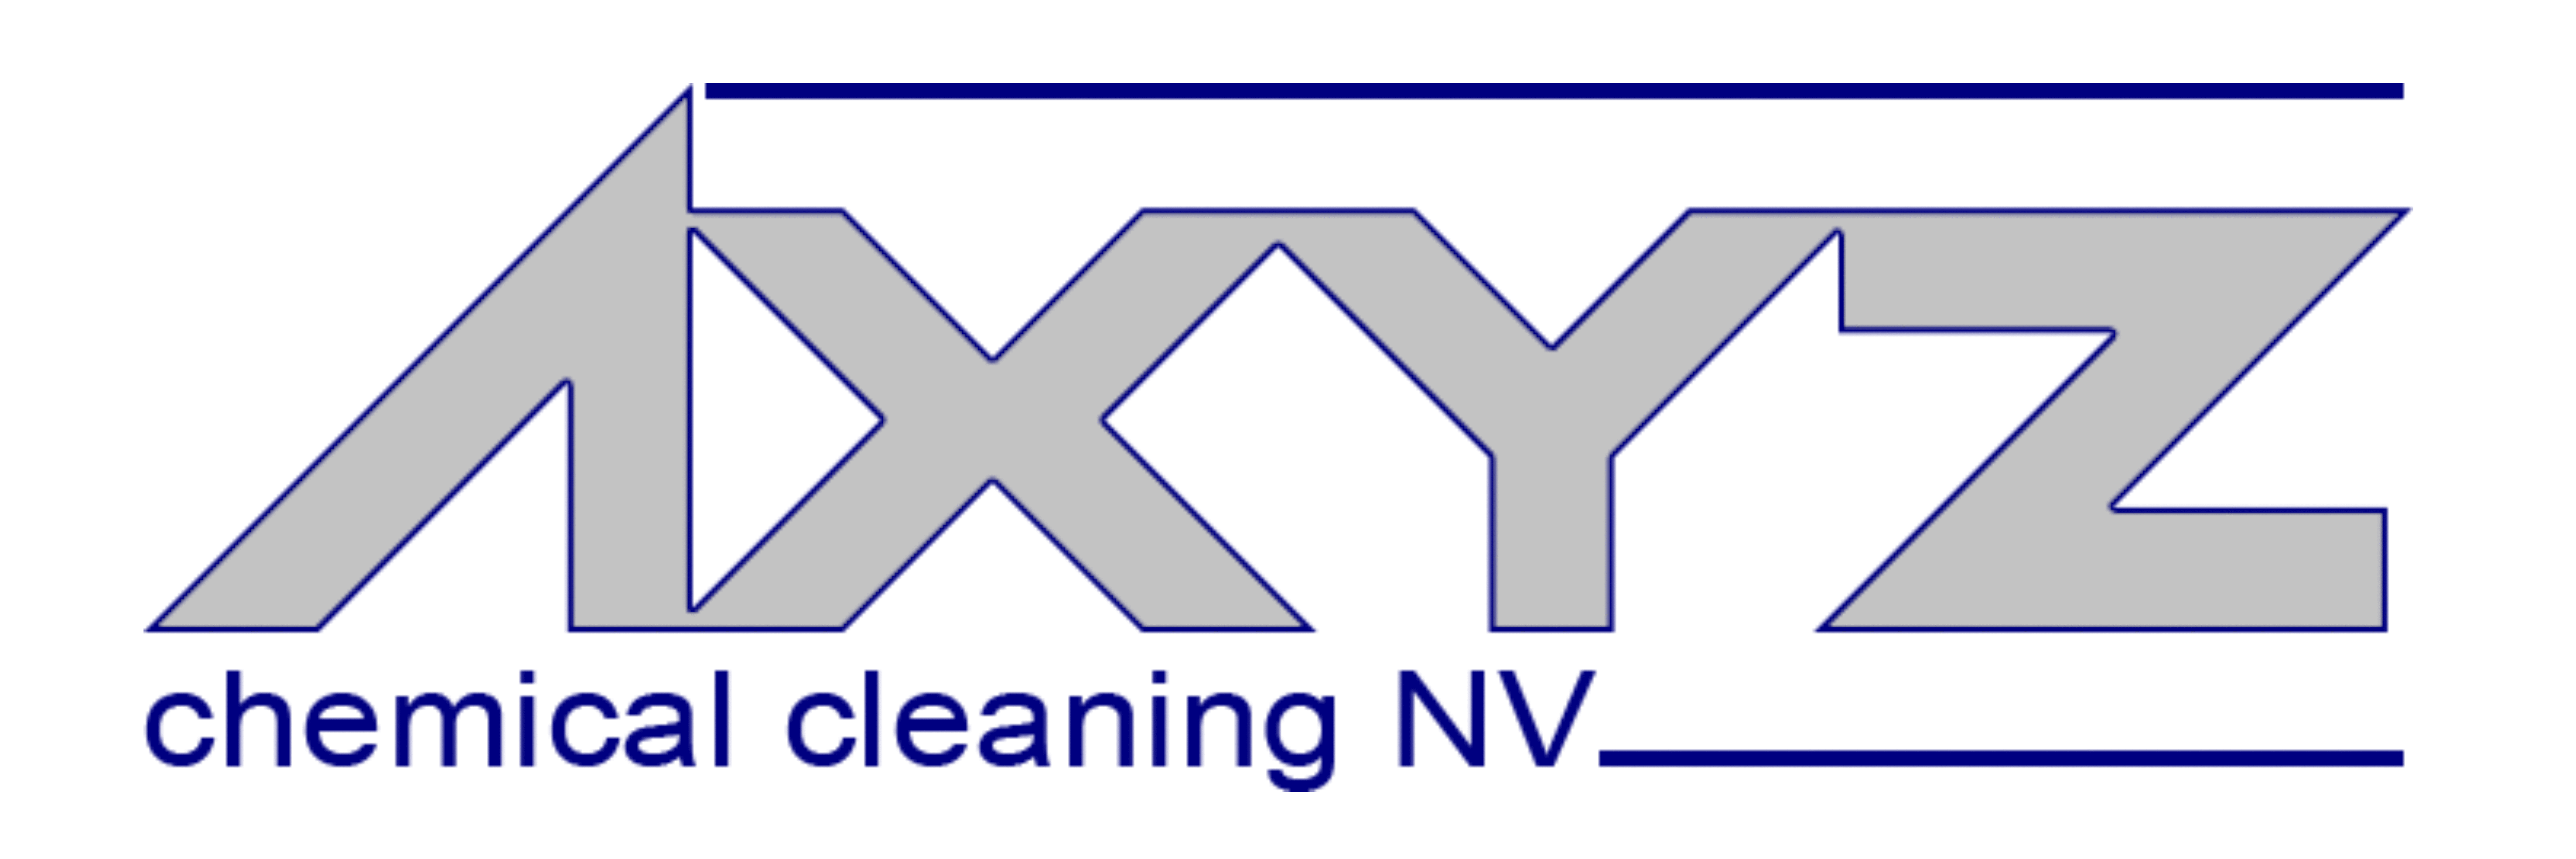 Axyz Chemical Cleaning NV